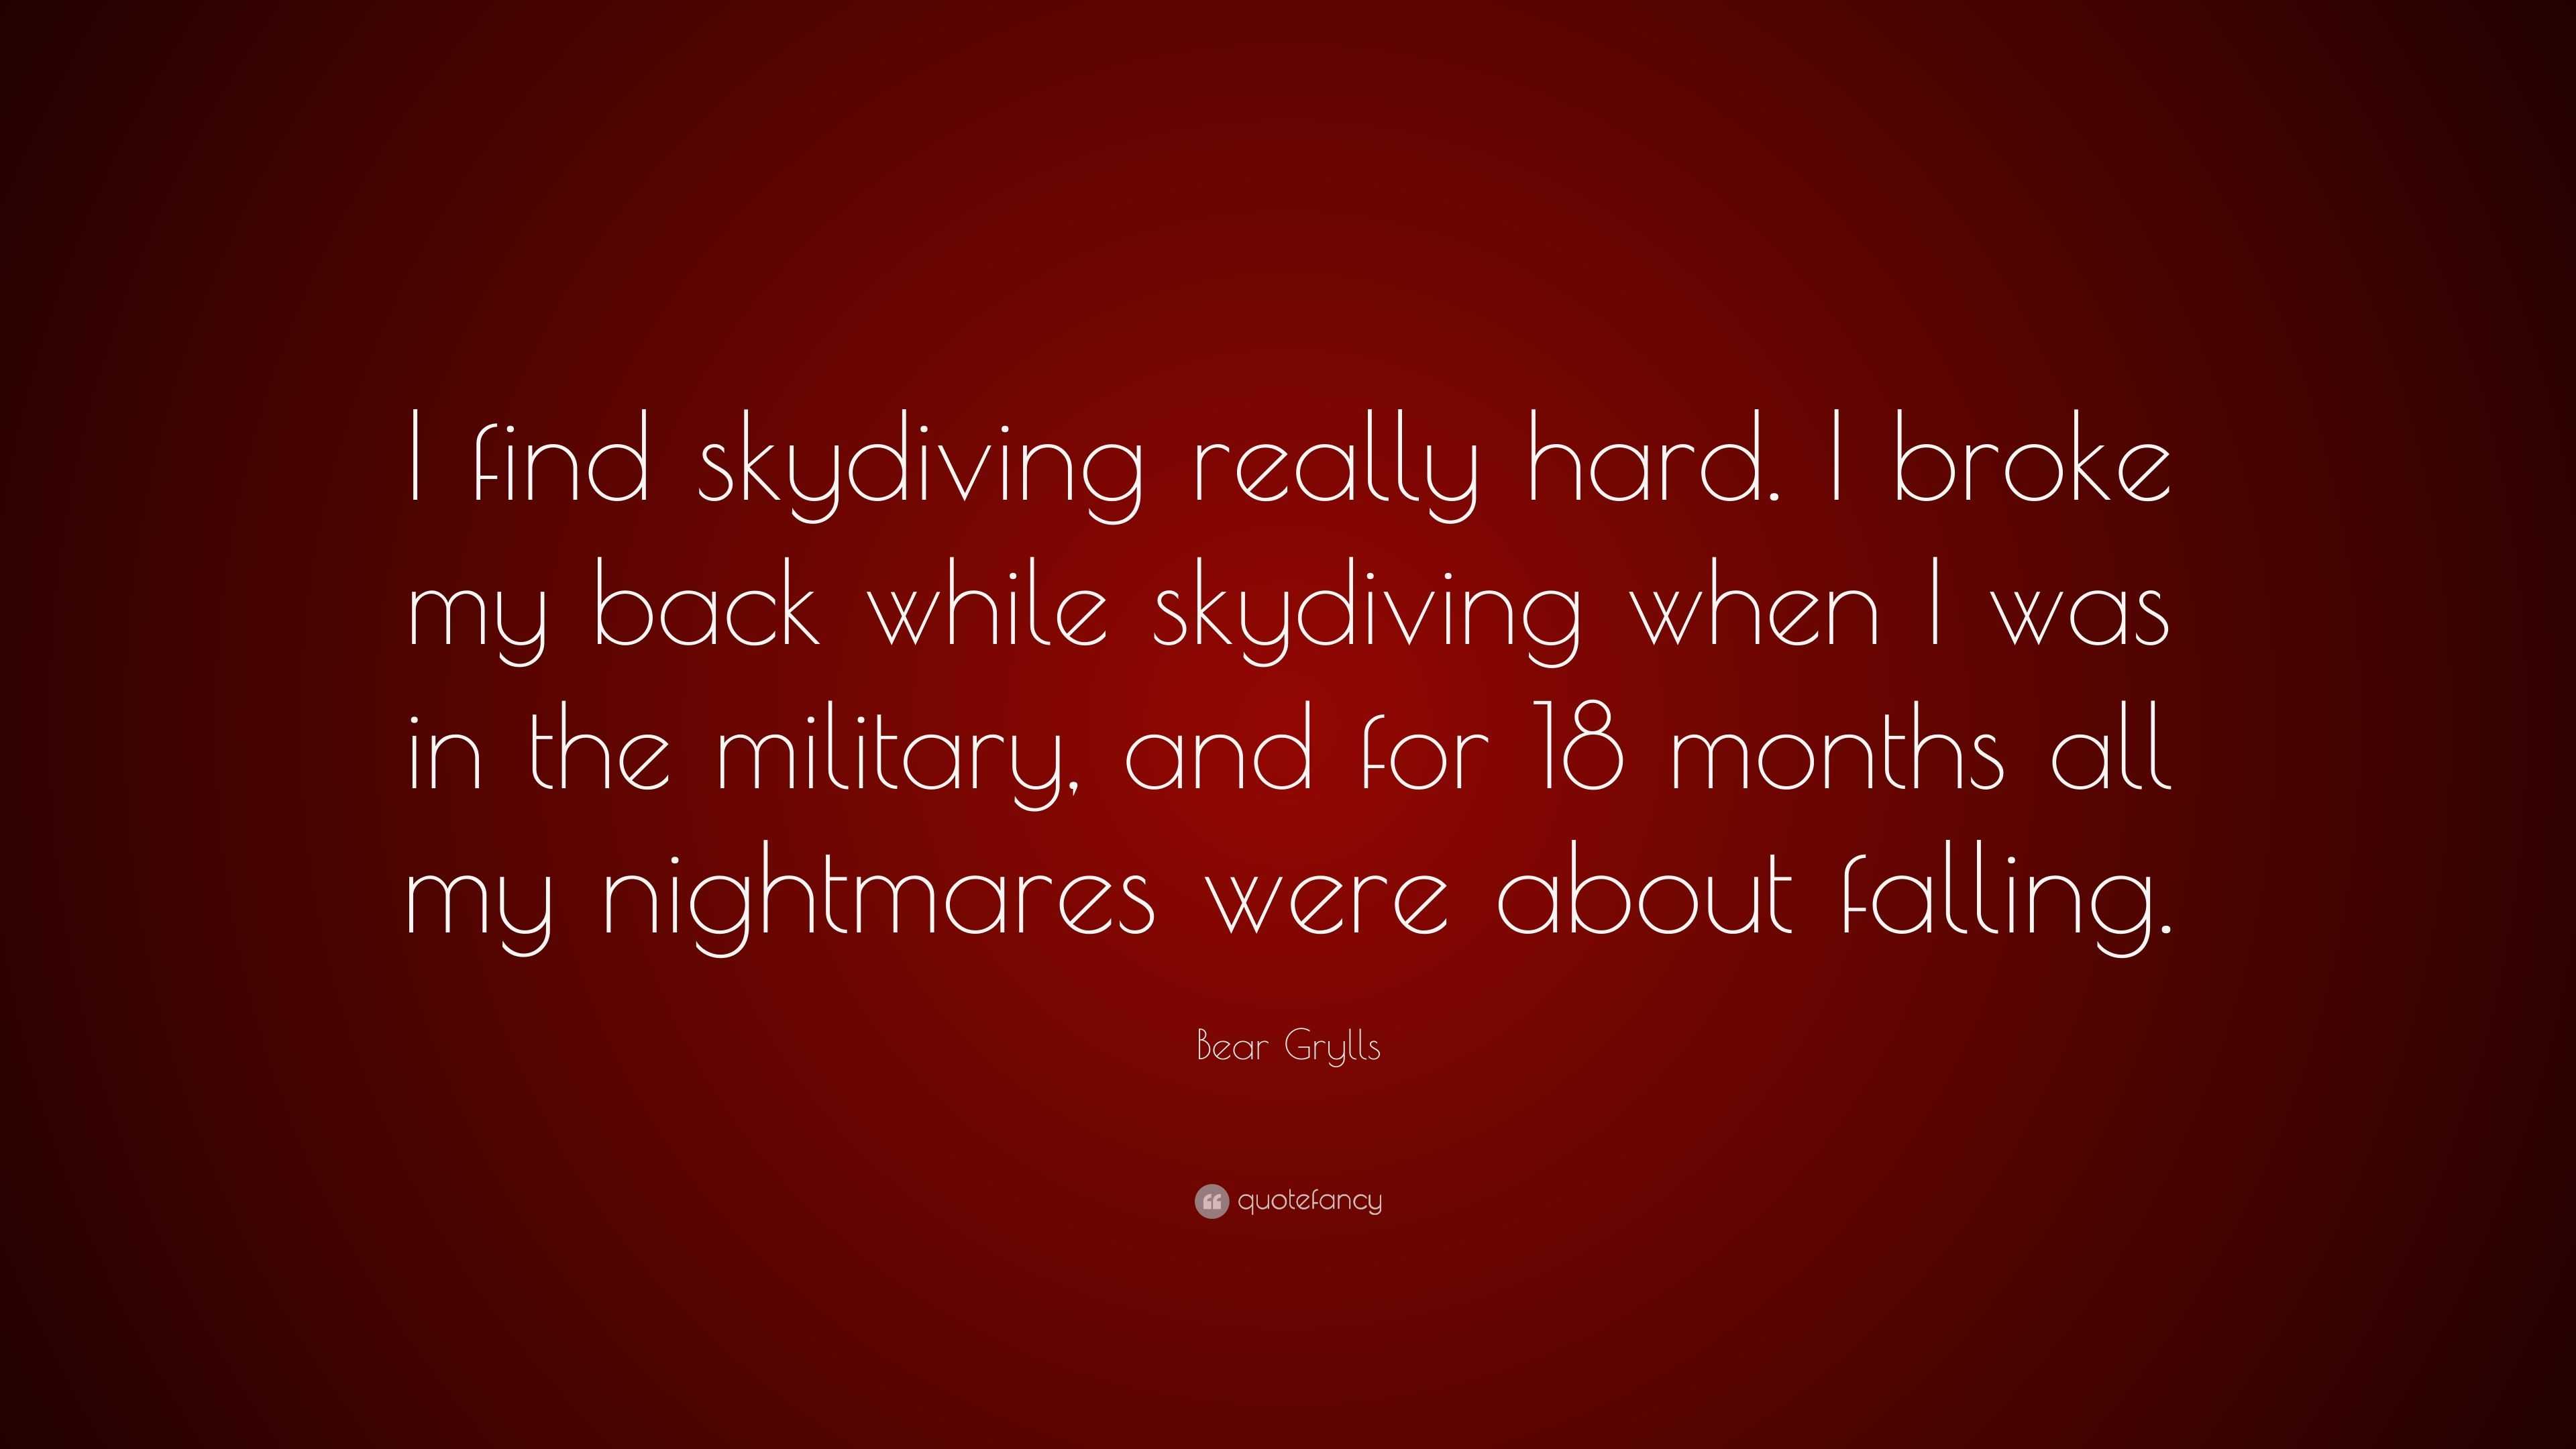 Bear Grylls Quote: “I find skydiving really hard. I broke my back while ...